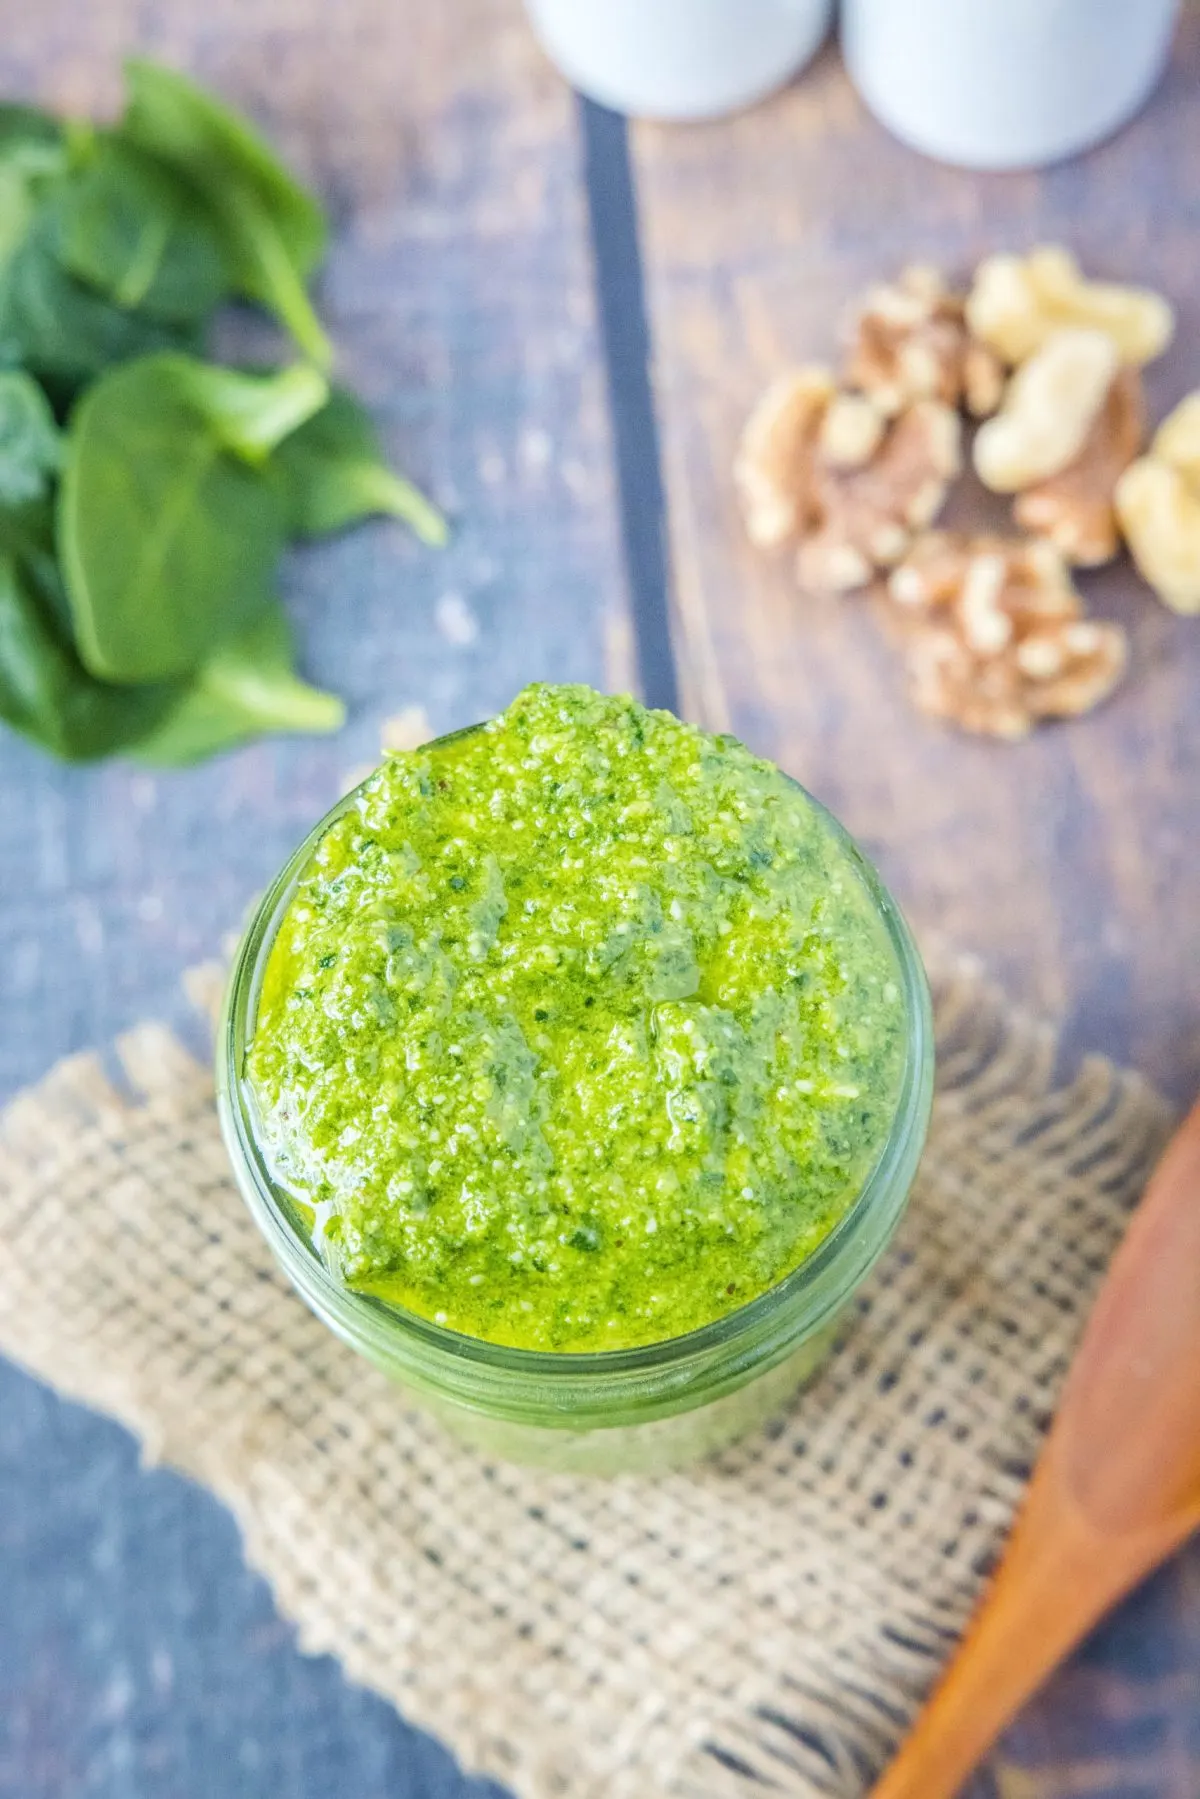 Overhead view of a jar of pesto with spinach and walnuts next to it